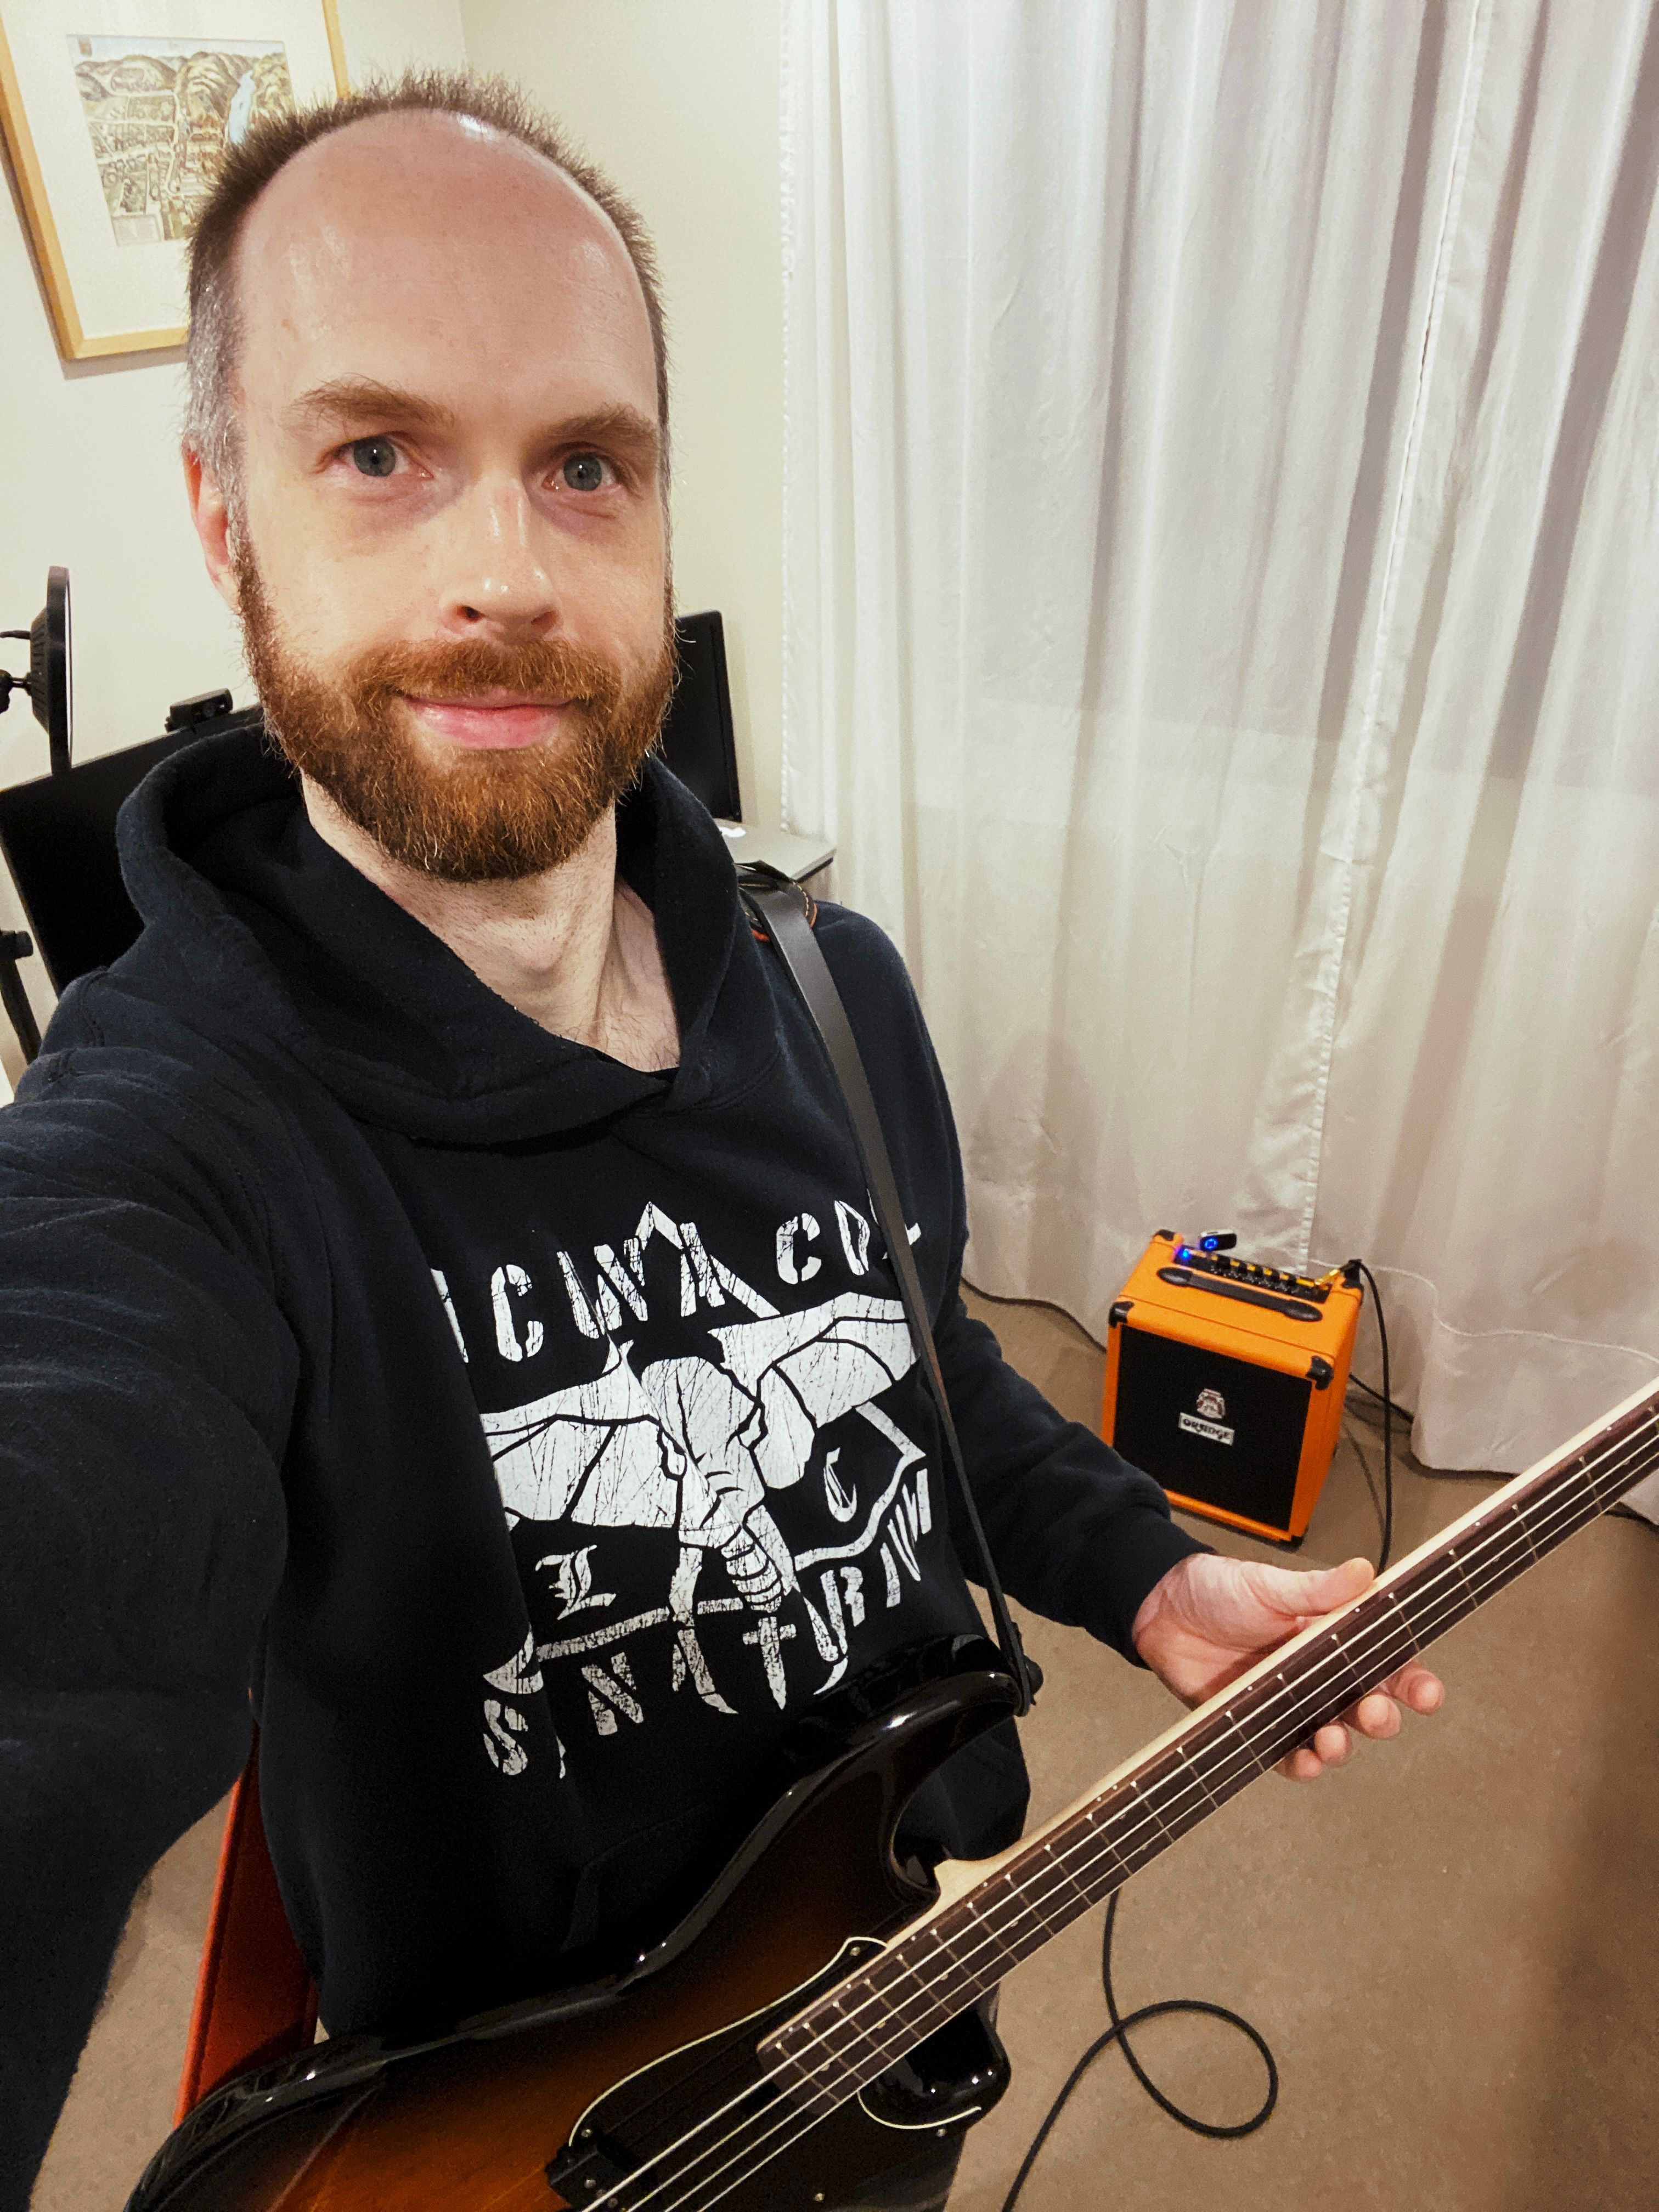 A photo of me, a white man with a beard and short hair who is in increasing need of a haircut, holding a bass guitar and smiling at the camera.